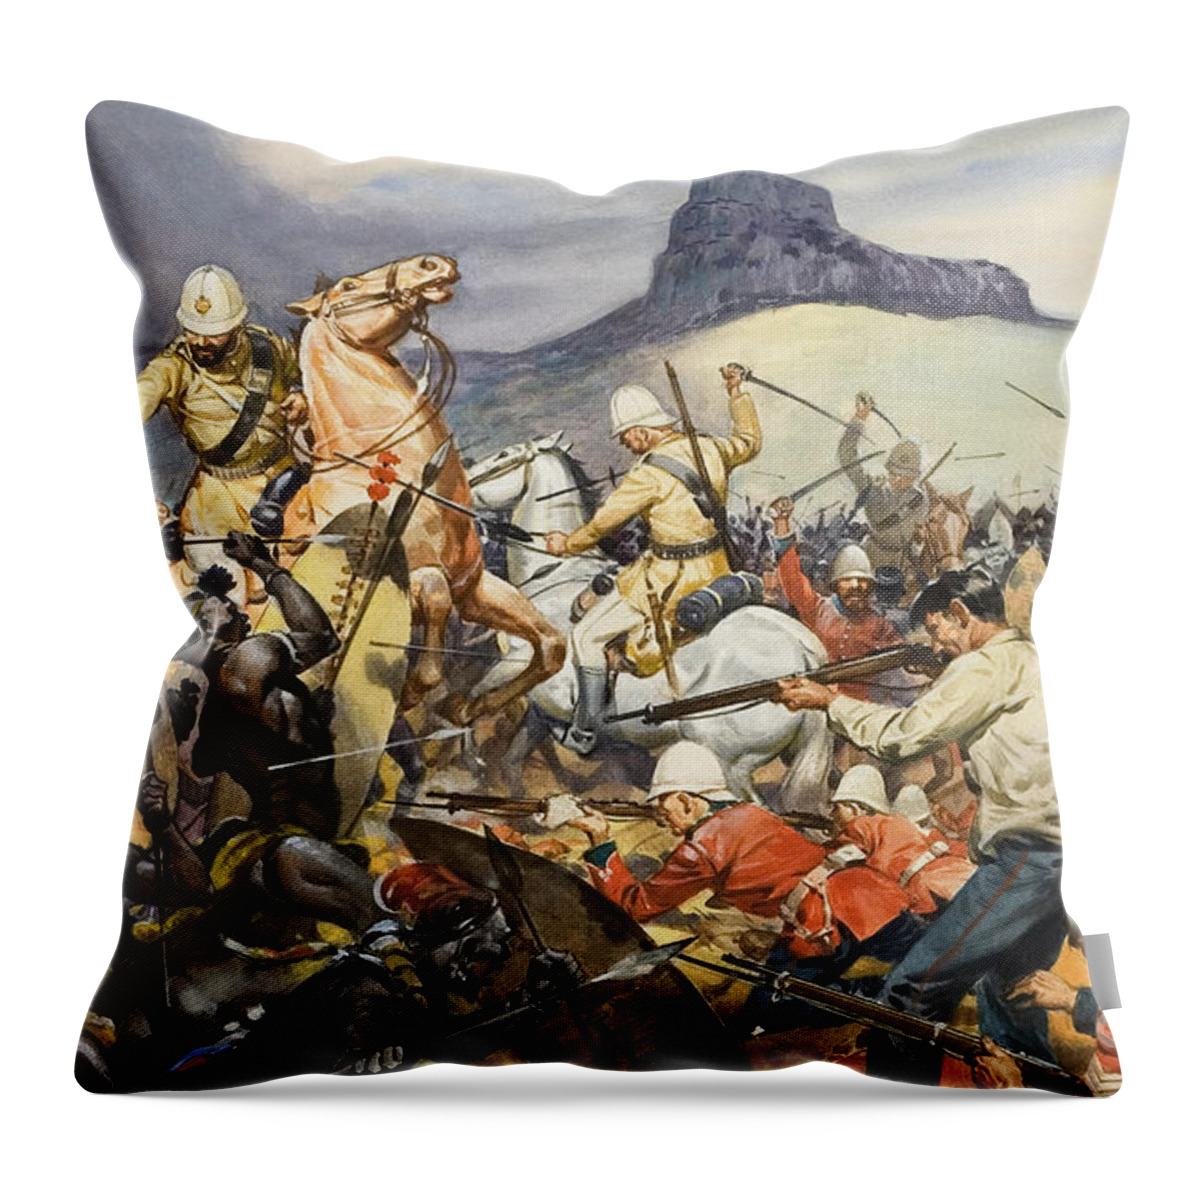 Boers And Natives Throw Pillow featuring the painting Boers and Natives by James Edwin McConnell